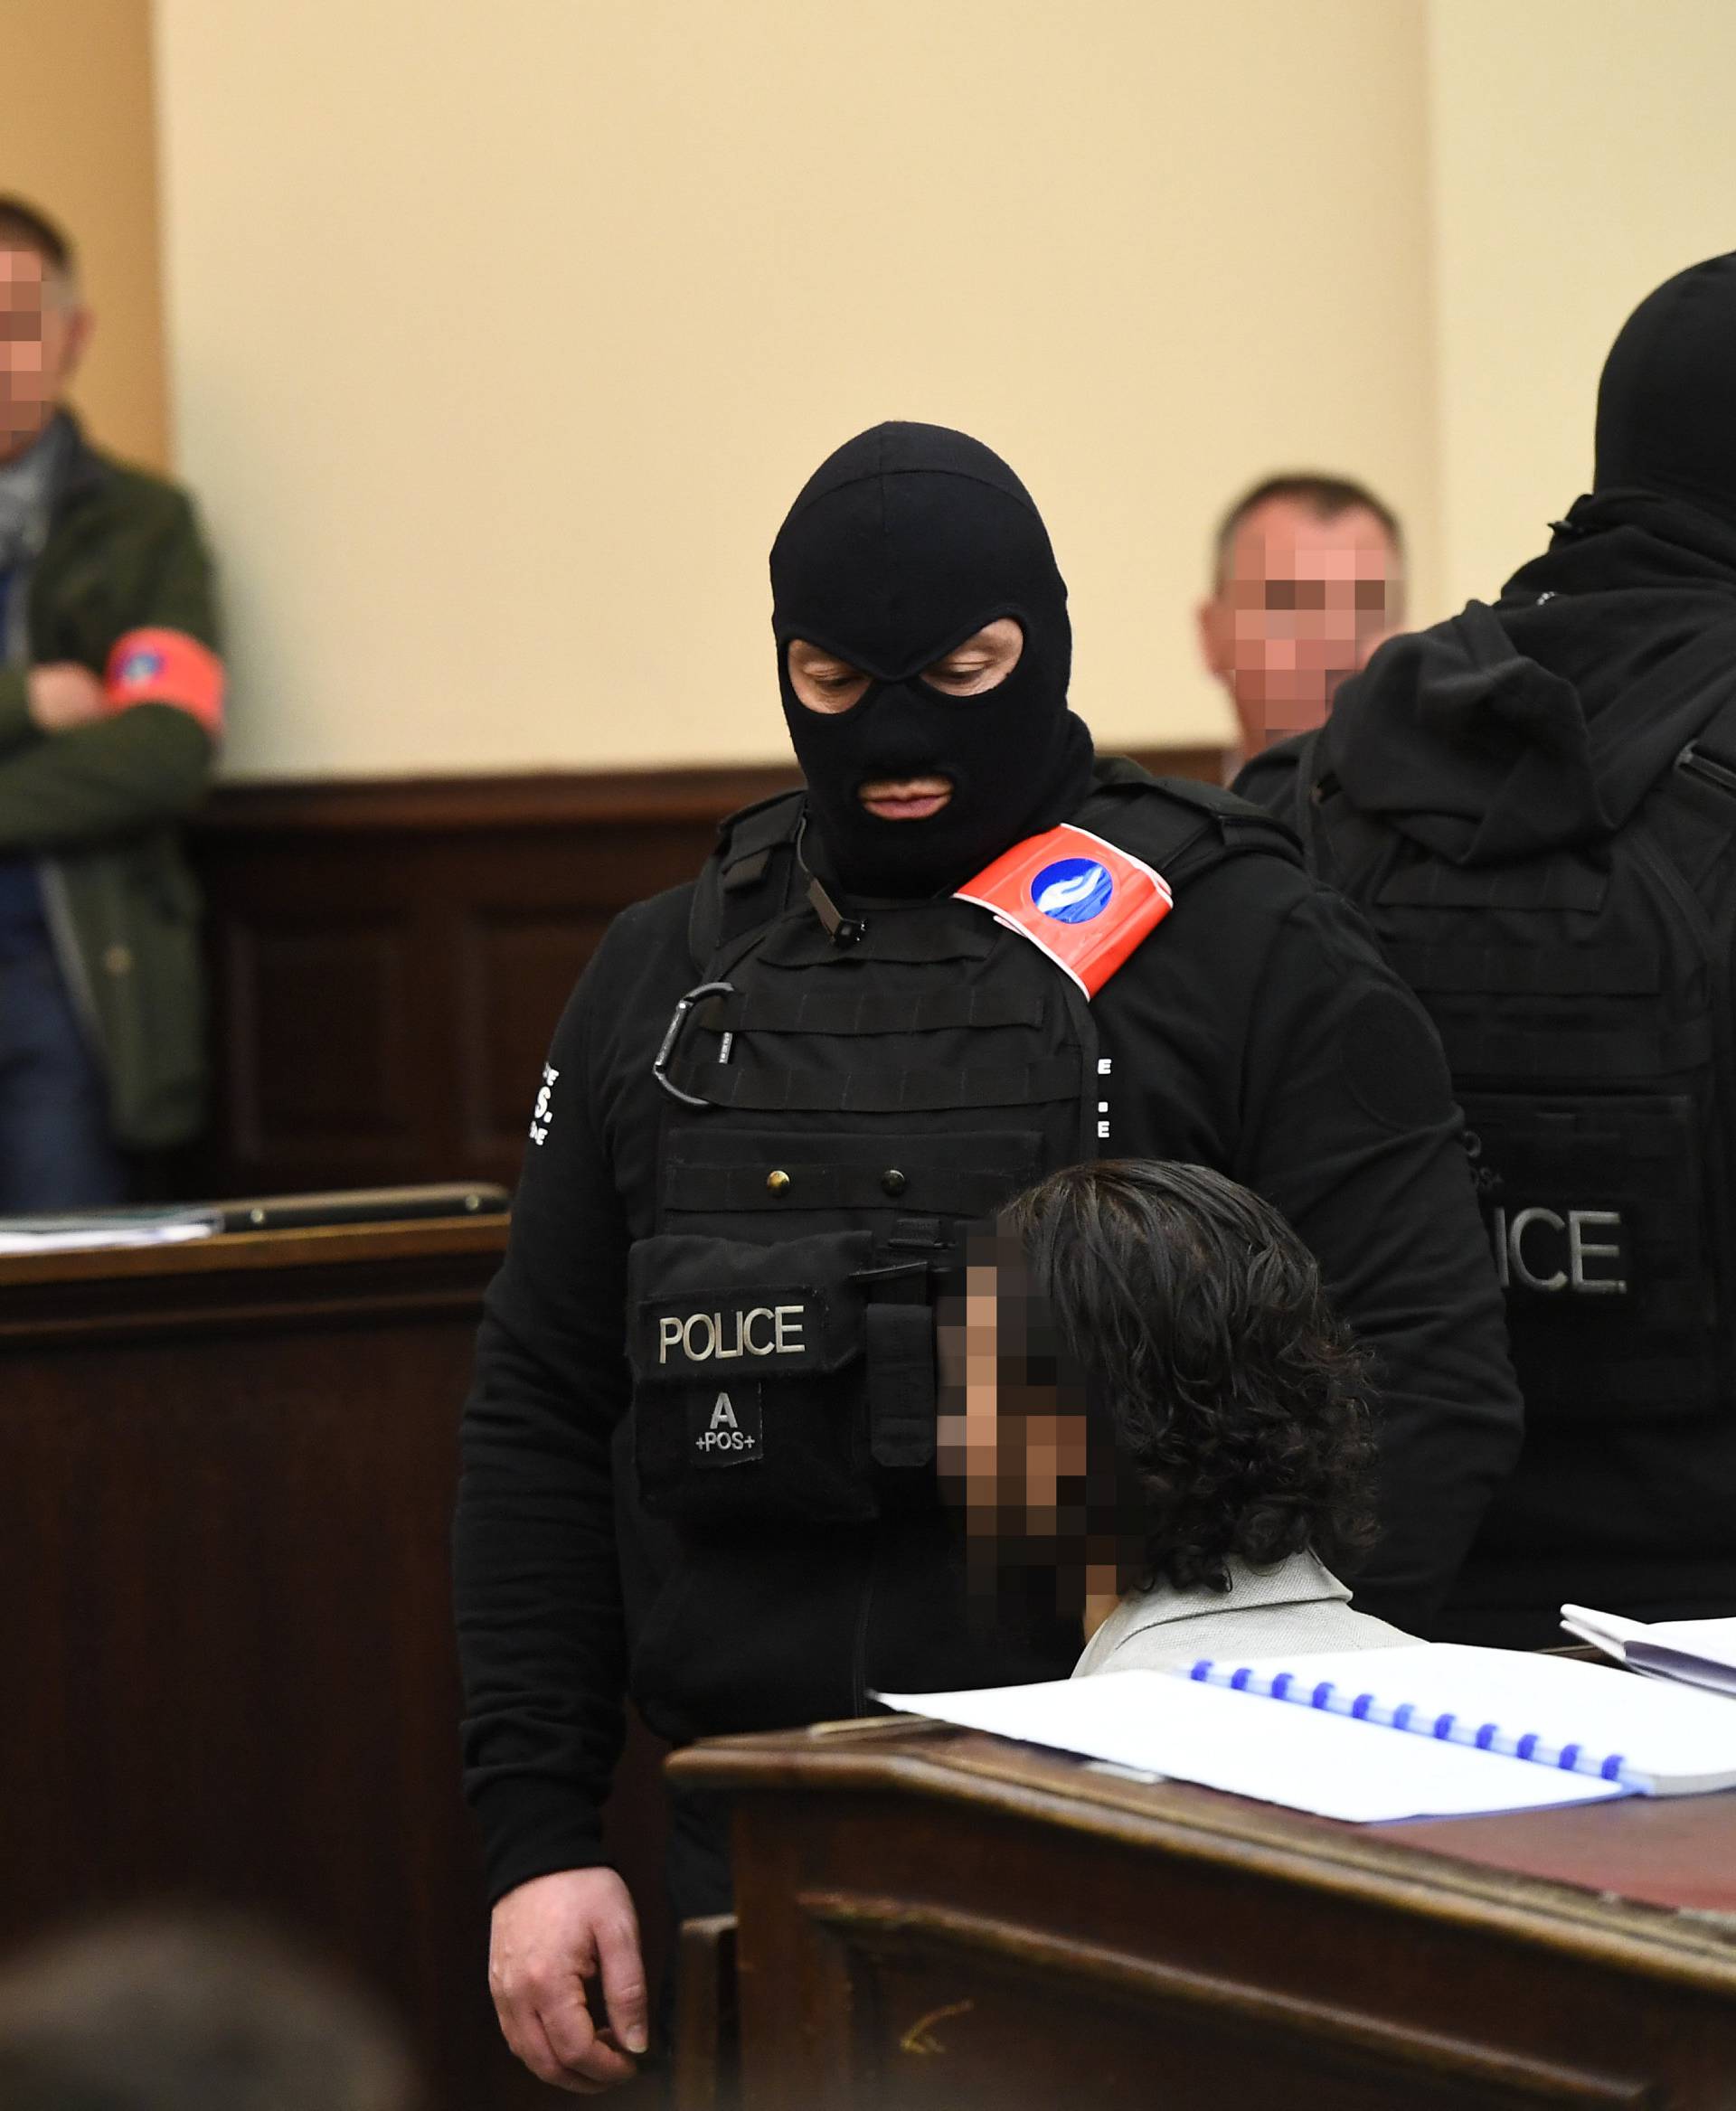 Salah Abdeslam, one of the suspects in the 2015 Islamic State attacks in Paris, appears in court during his trial in Brussels